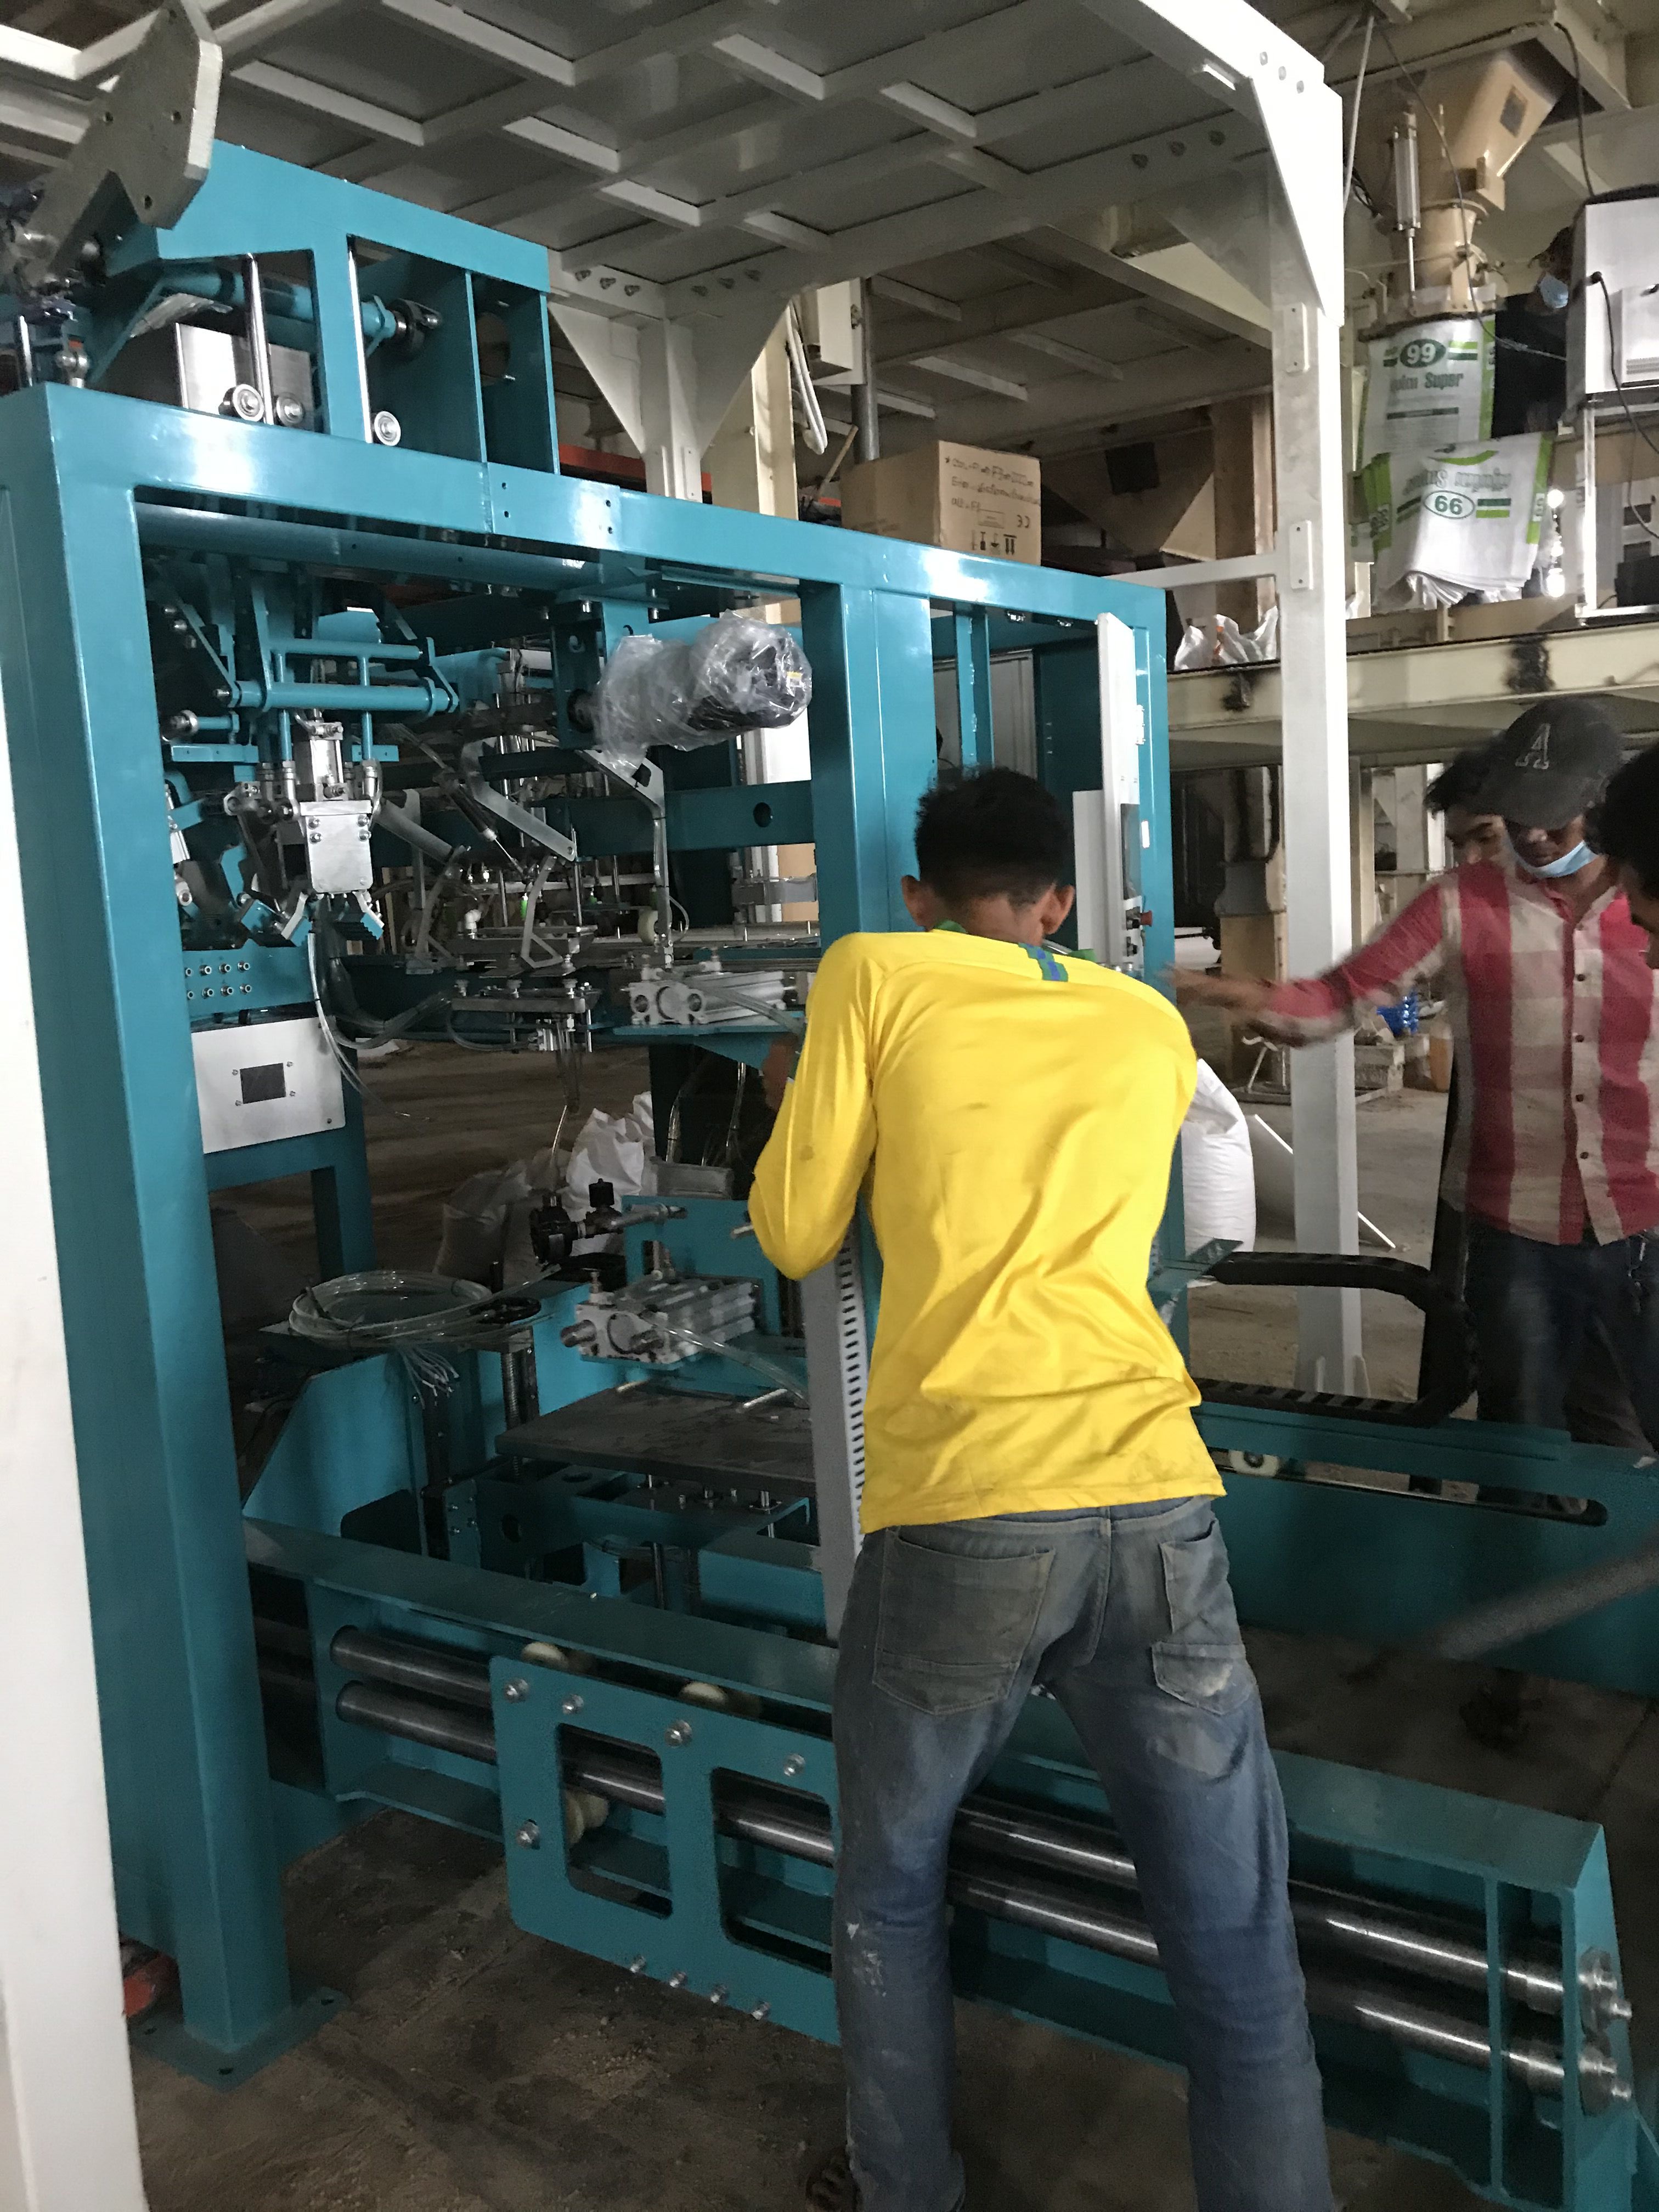 Truck loading and Bagging Stations Fully Automatic Packing Palletizing Line Fully Automatic Packing Line Fully Automatic Bagging Line Fully Automatic filling and packaging line automated bagging syste